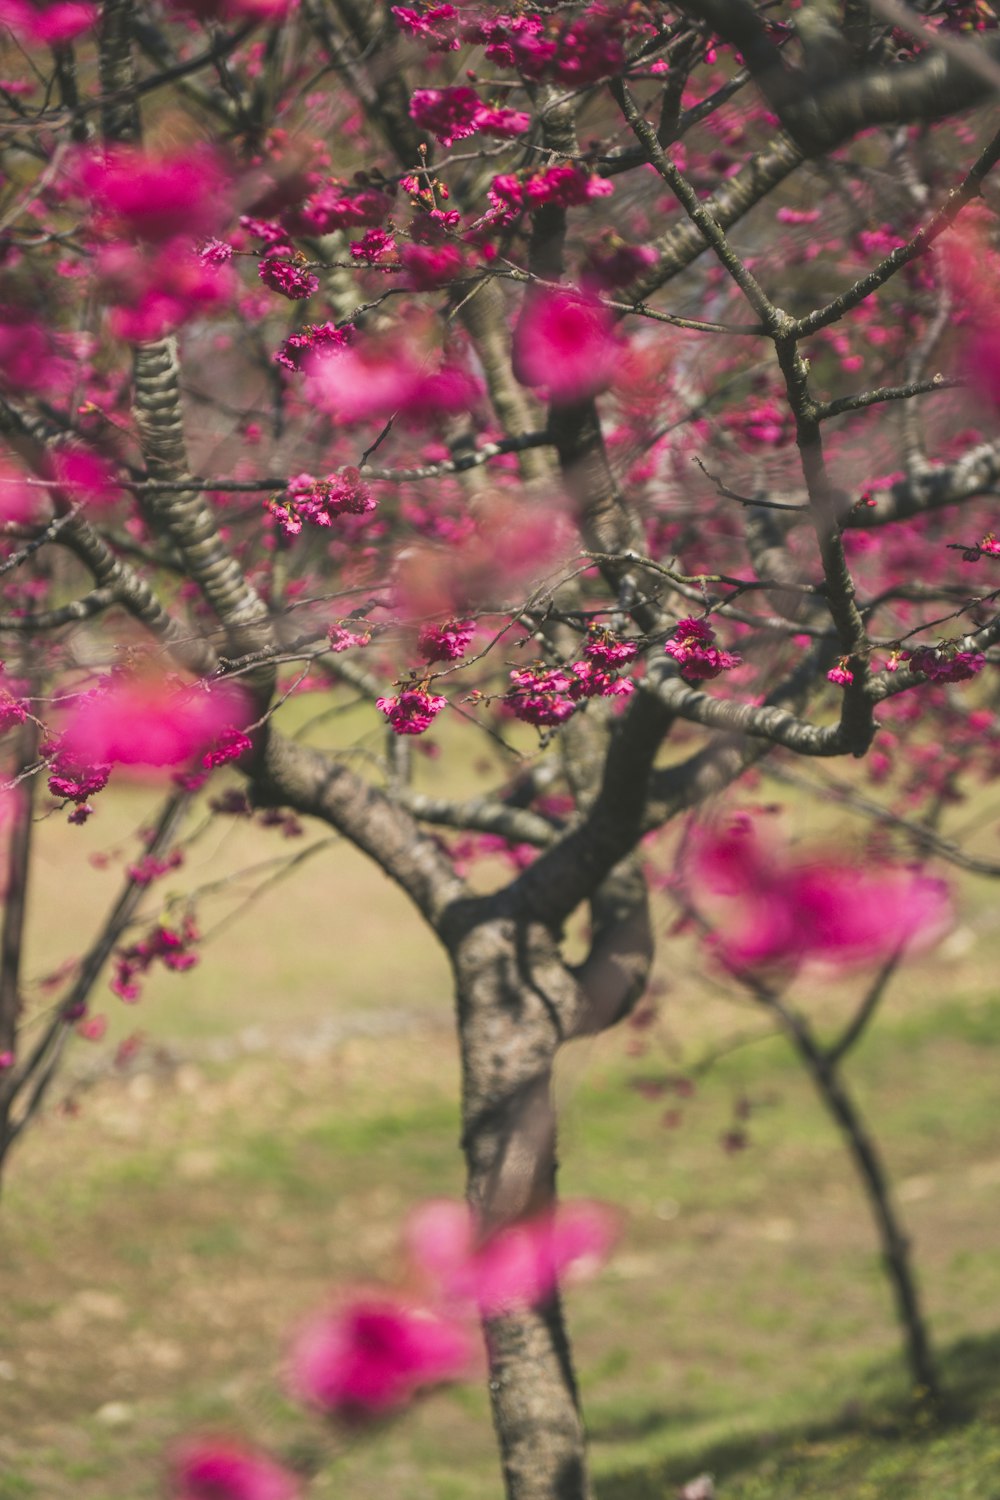 a tree with pink flowers in a grassy area